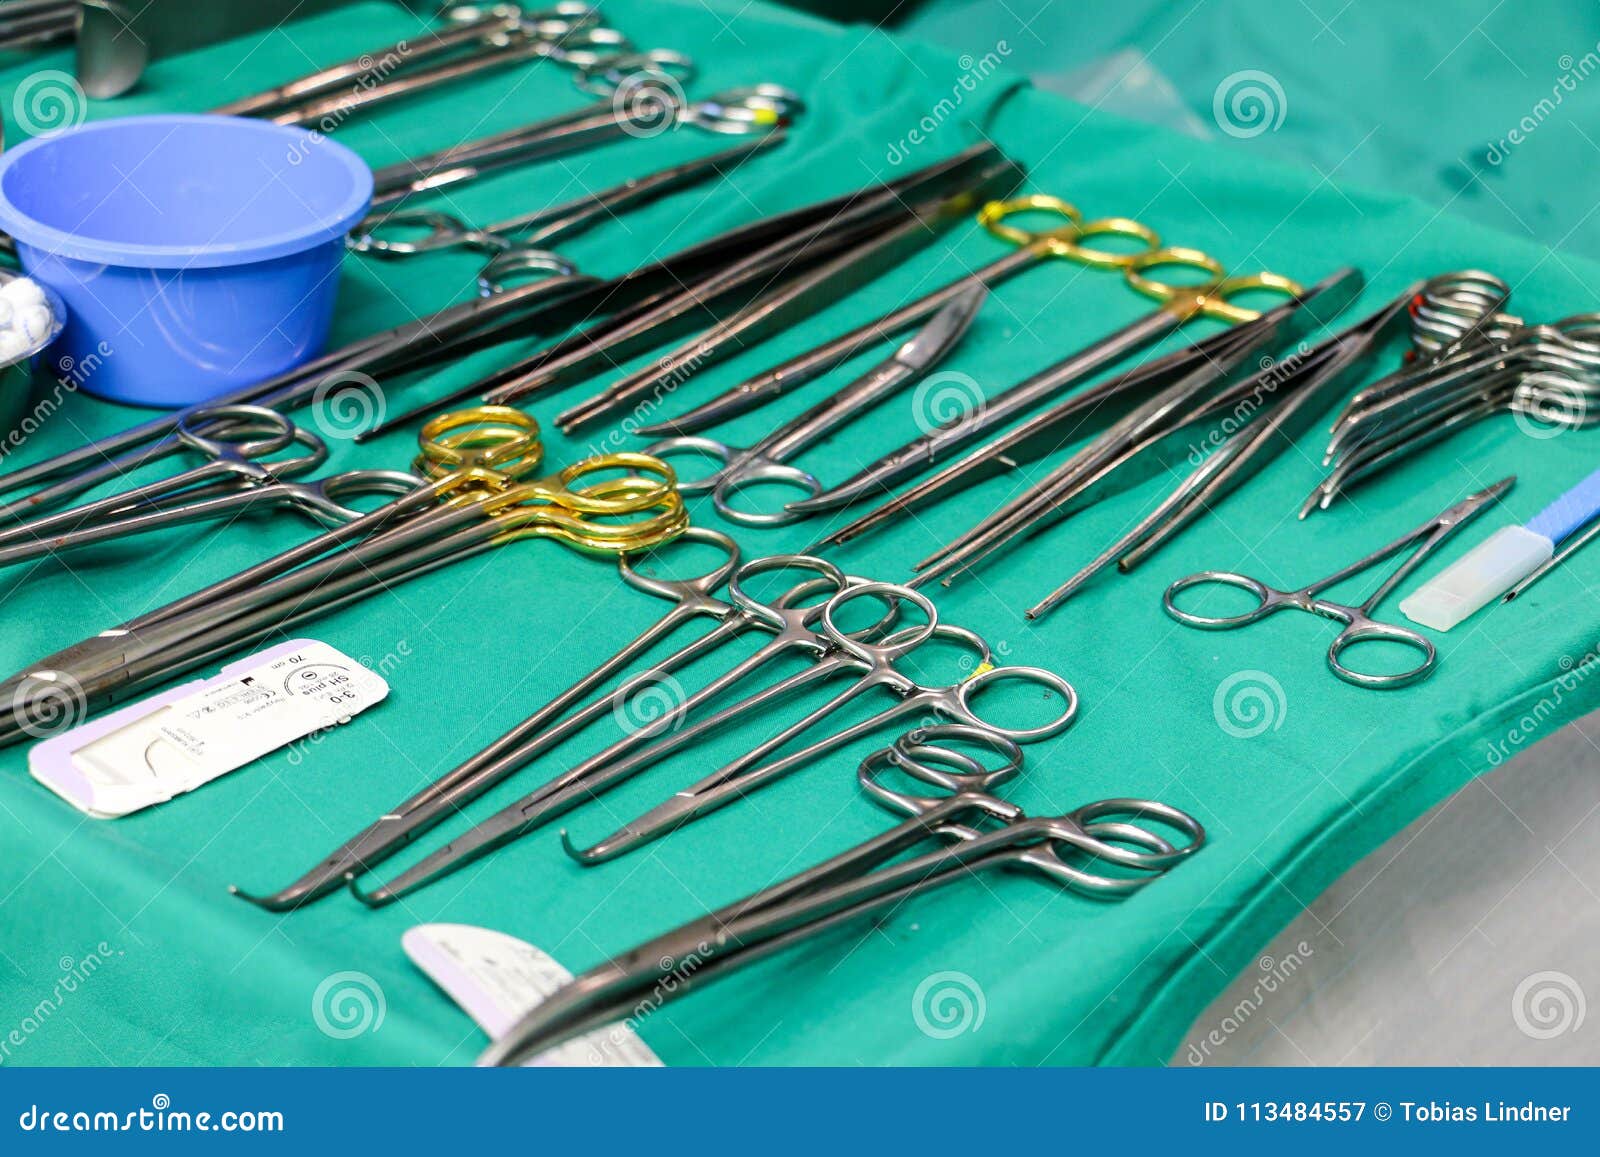 https://thumbs.dreamstime.com/z/medical-tools-surgical-equipment-sterile-table-medical-instruments-surgical-tools-operating-theatre-setup-113484557.jpg